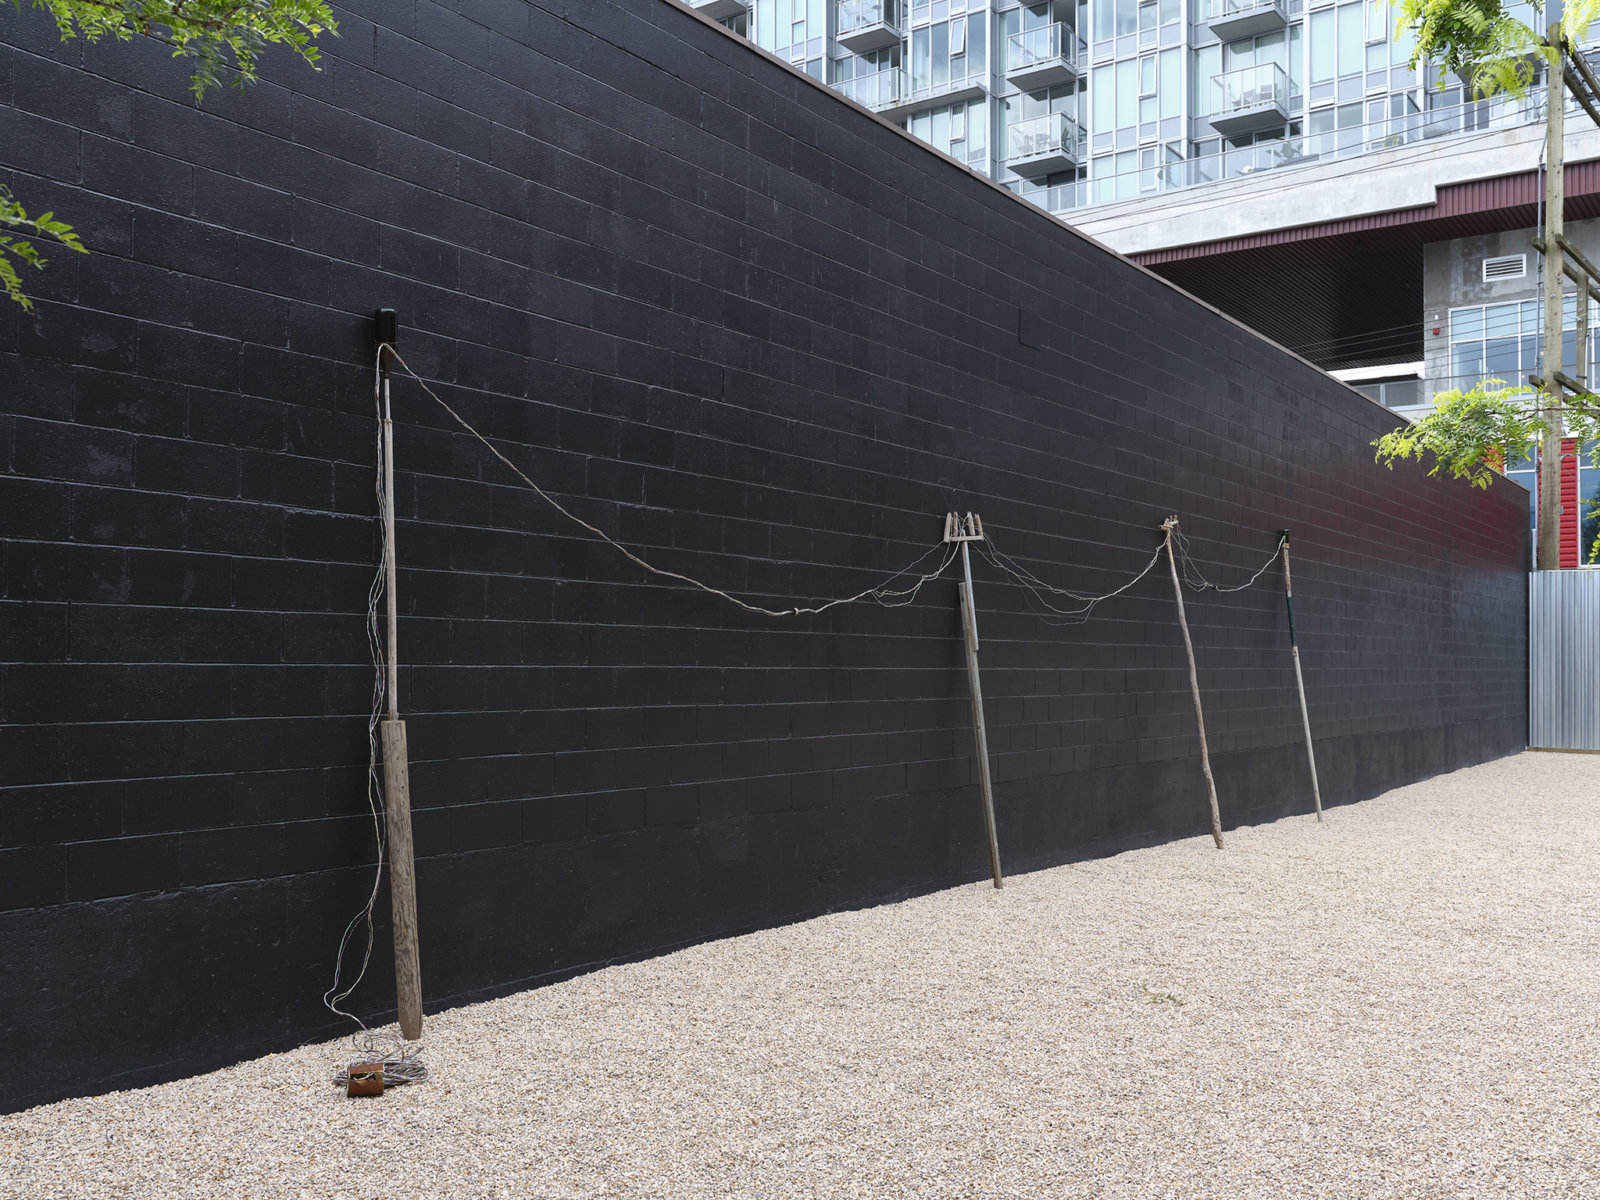 Ashes Withyman, Electrical poles from a place, near the buried canal, 2011–2012, wire, steel, wood, glass bottles, dimensions variable